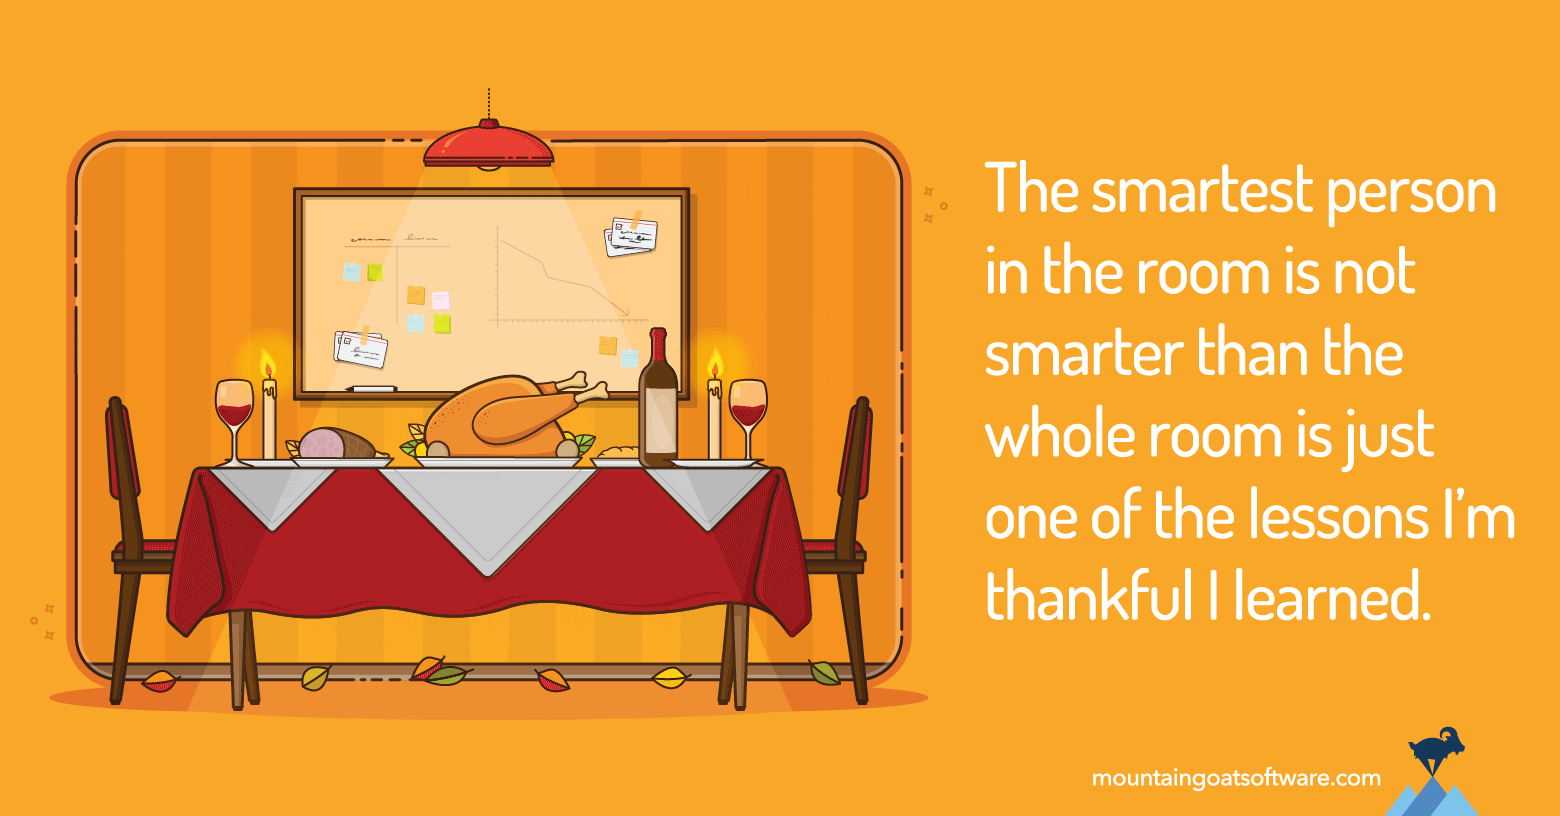  Five Lessons I’m Thankful I Learned in my Agile Career